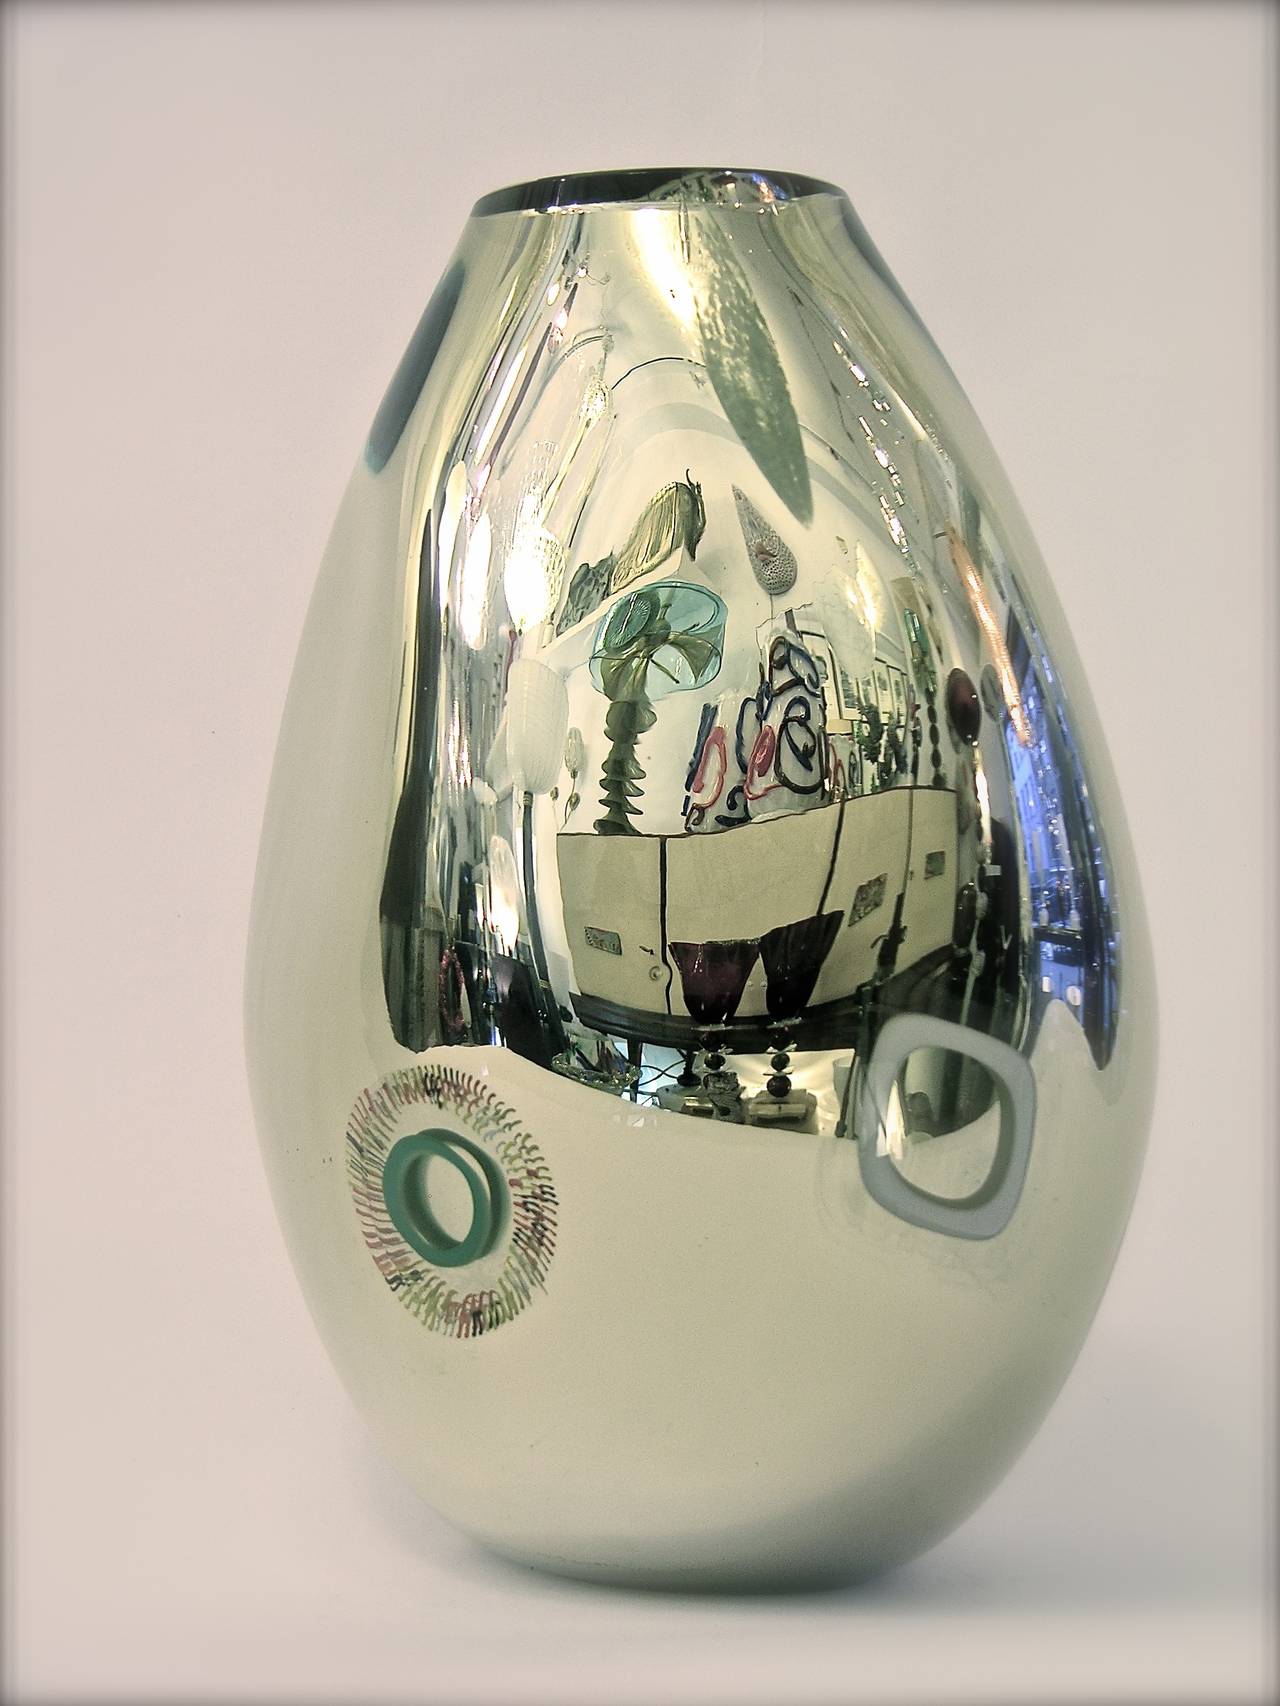 Italian Murano glass vase, contemporary Work of Art signed by Davide Dona. The execution is extraordinary and reveals mastership in glass blowing and decorative techniques: The ovoid-shaped vase is worked with a sophisticated mirrored finish in